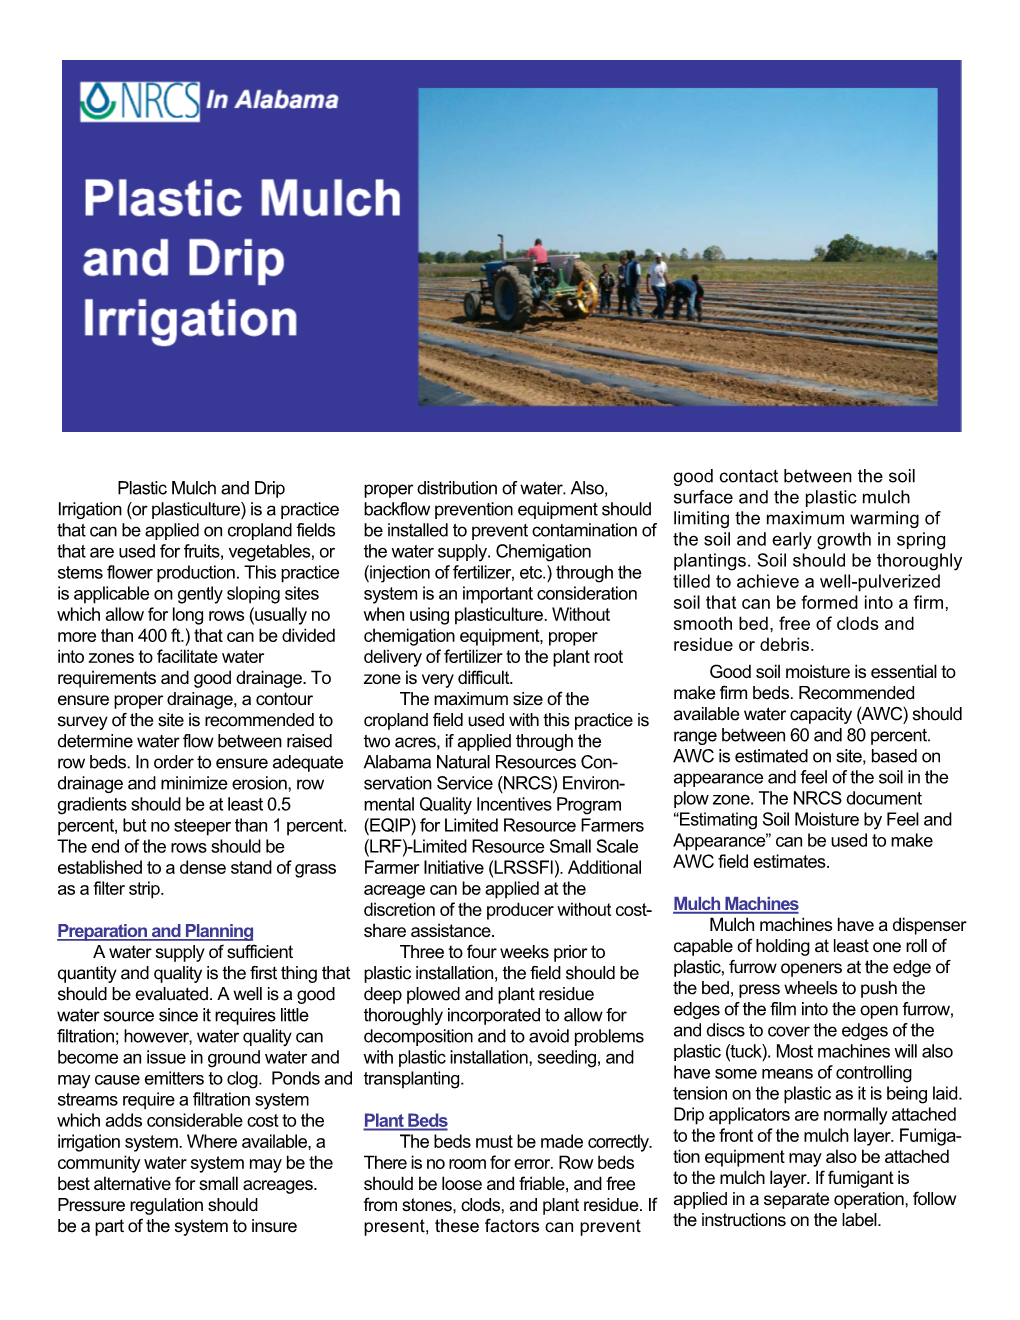 Plastic Mulch and Drip Irrigation (Or Plasticulture) Is a Practice That Can